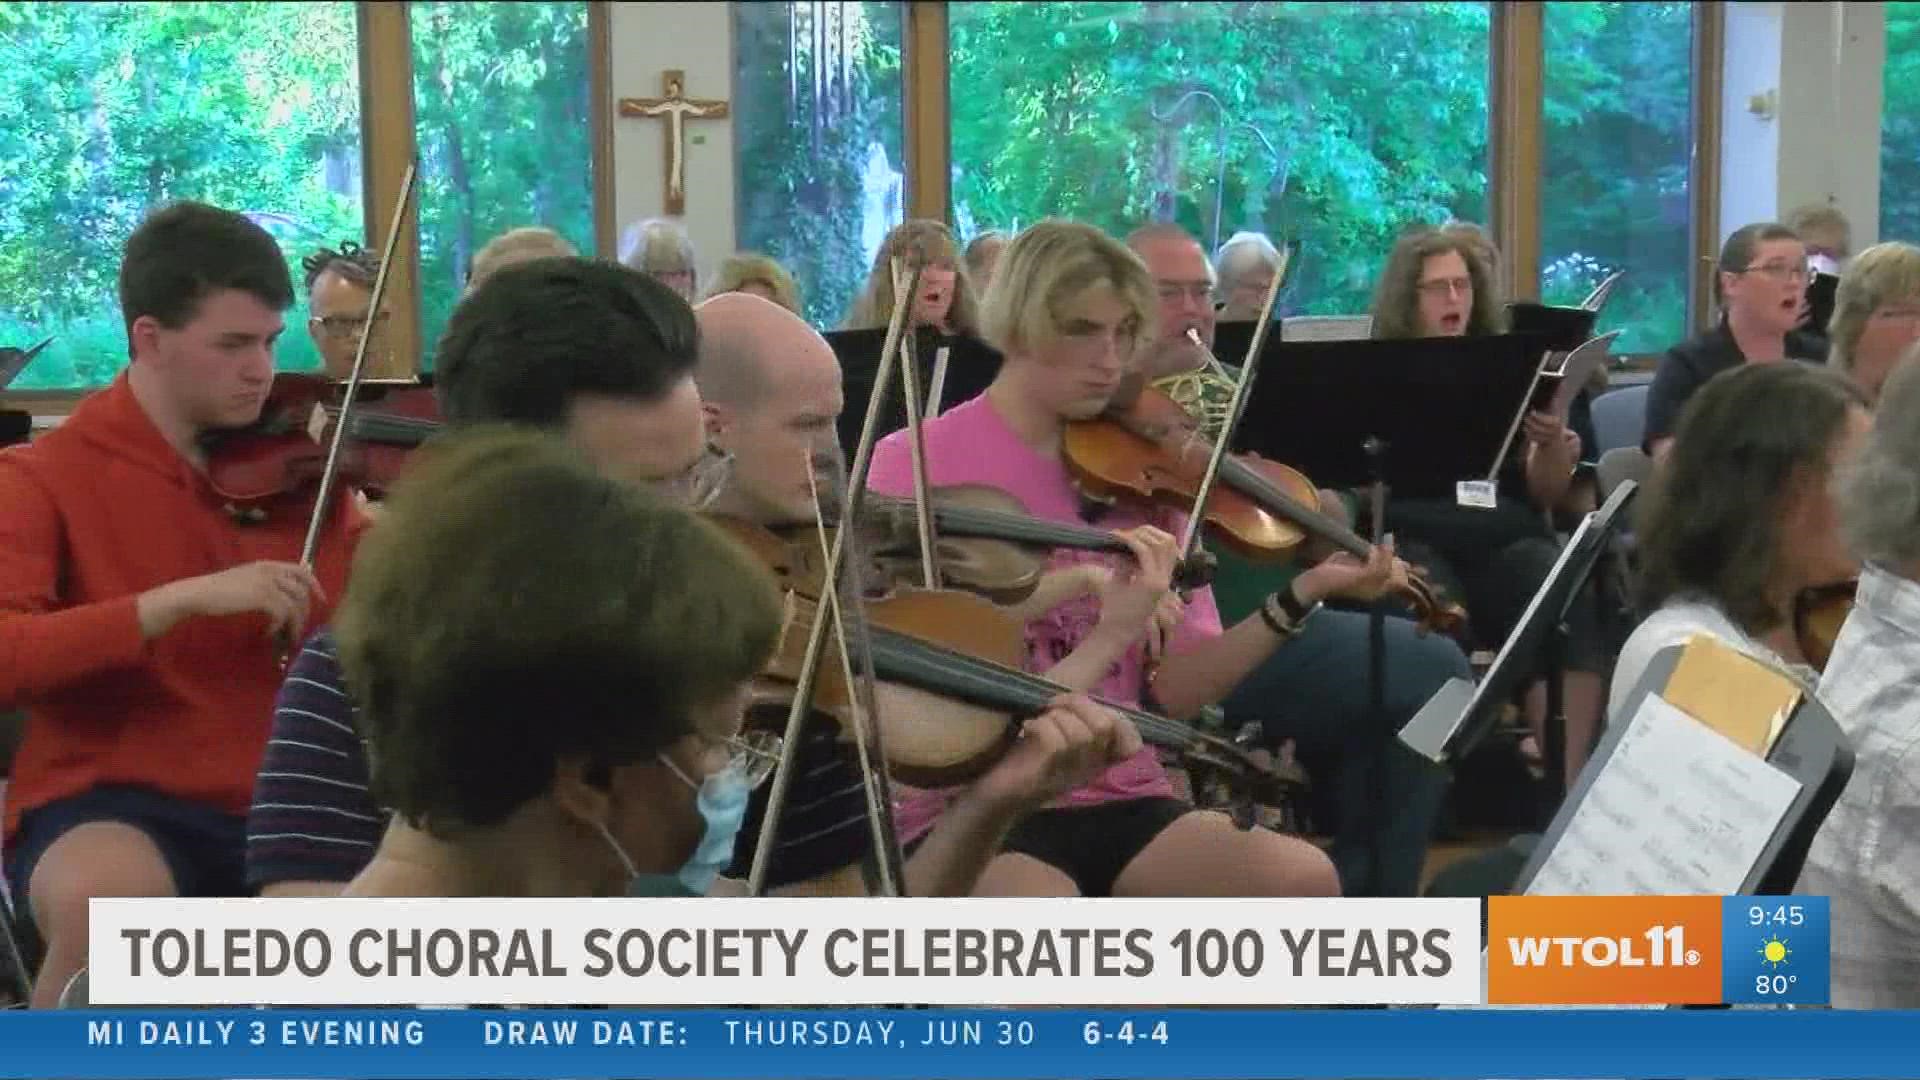 The Toledo Choral Society celebrates 100 years with special events.